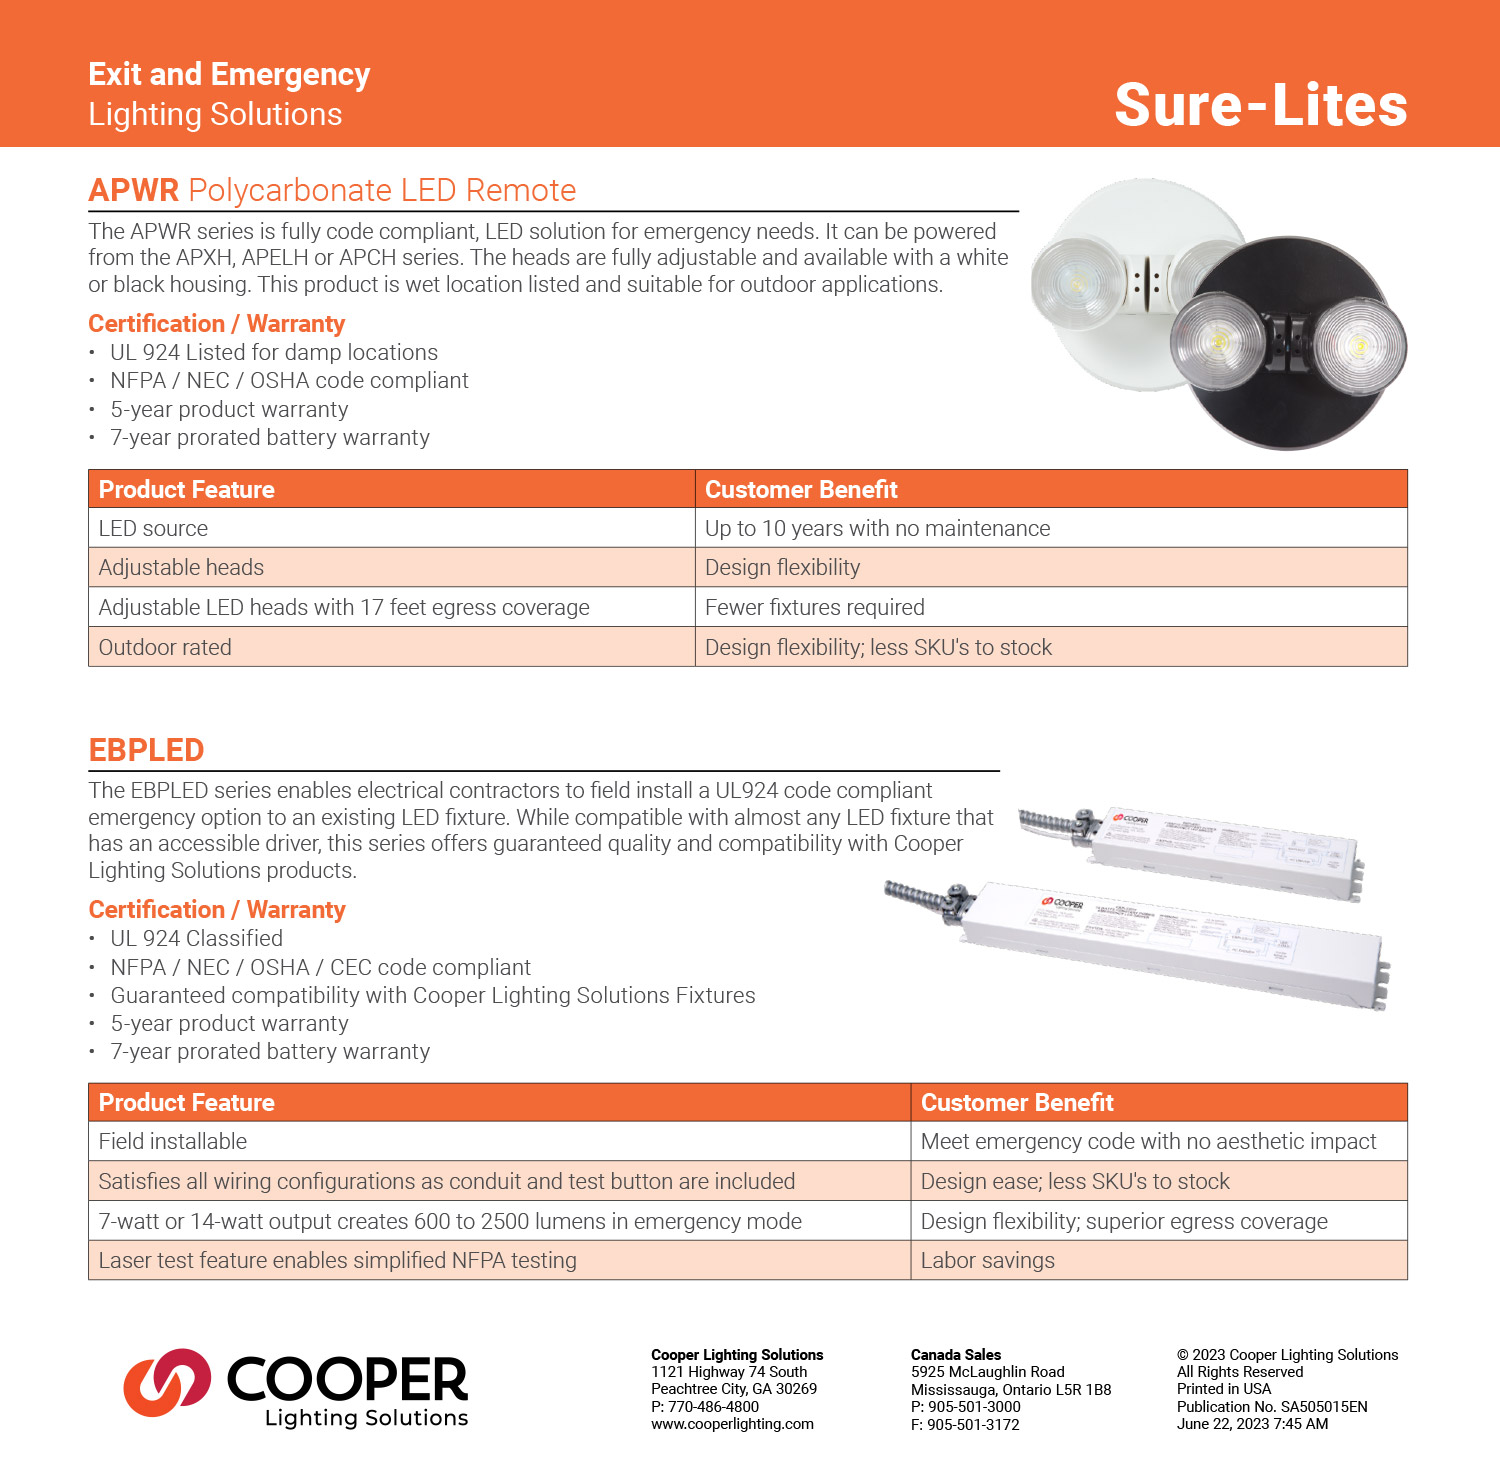 Cooper Lighting Solutions exit and emergency light solutions